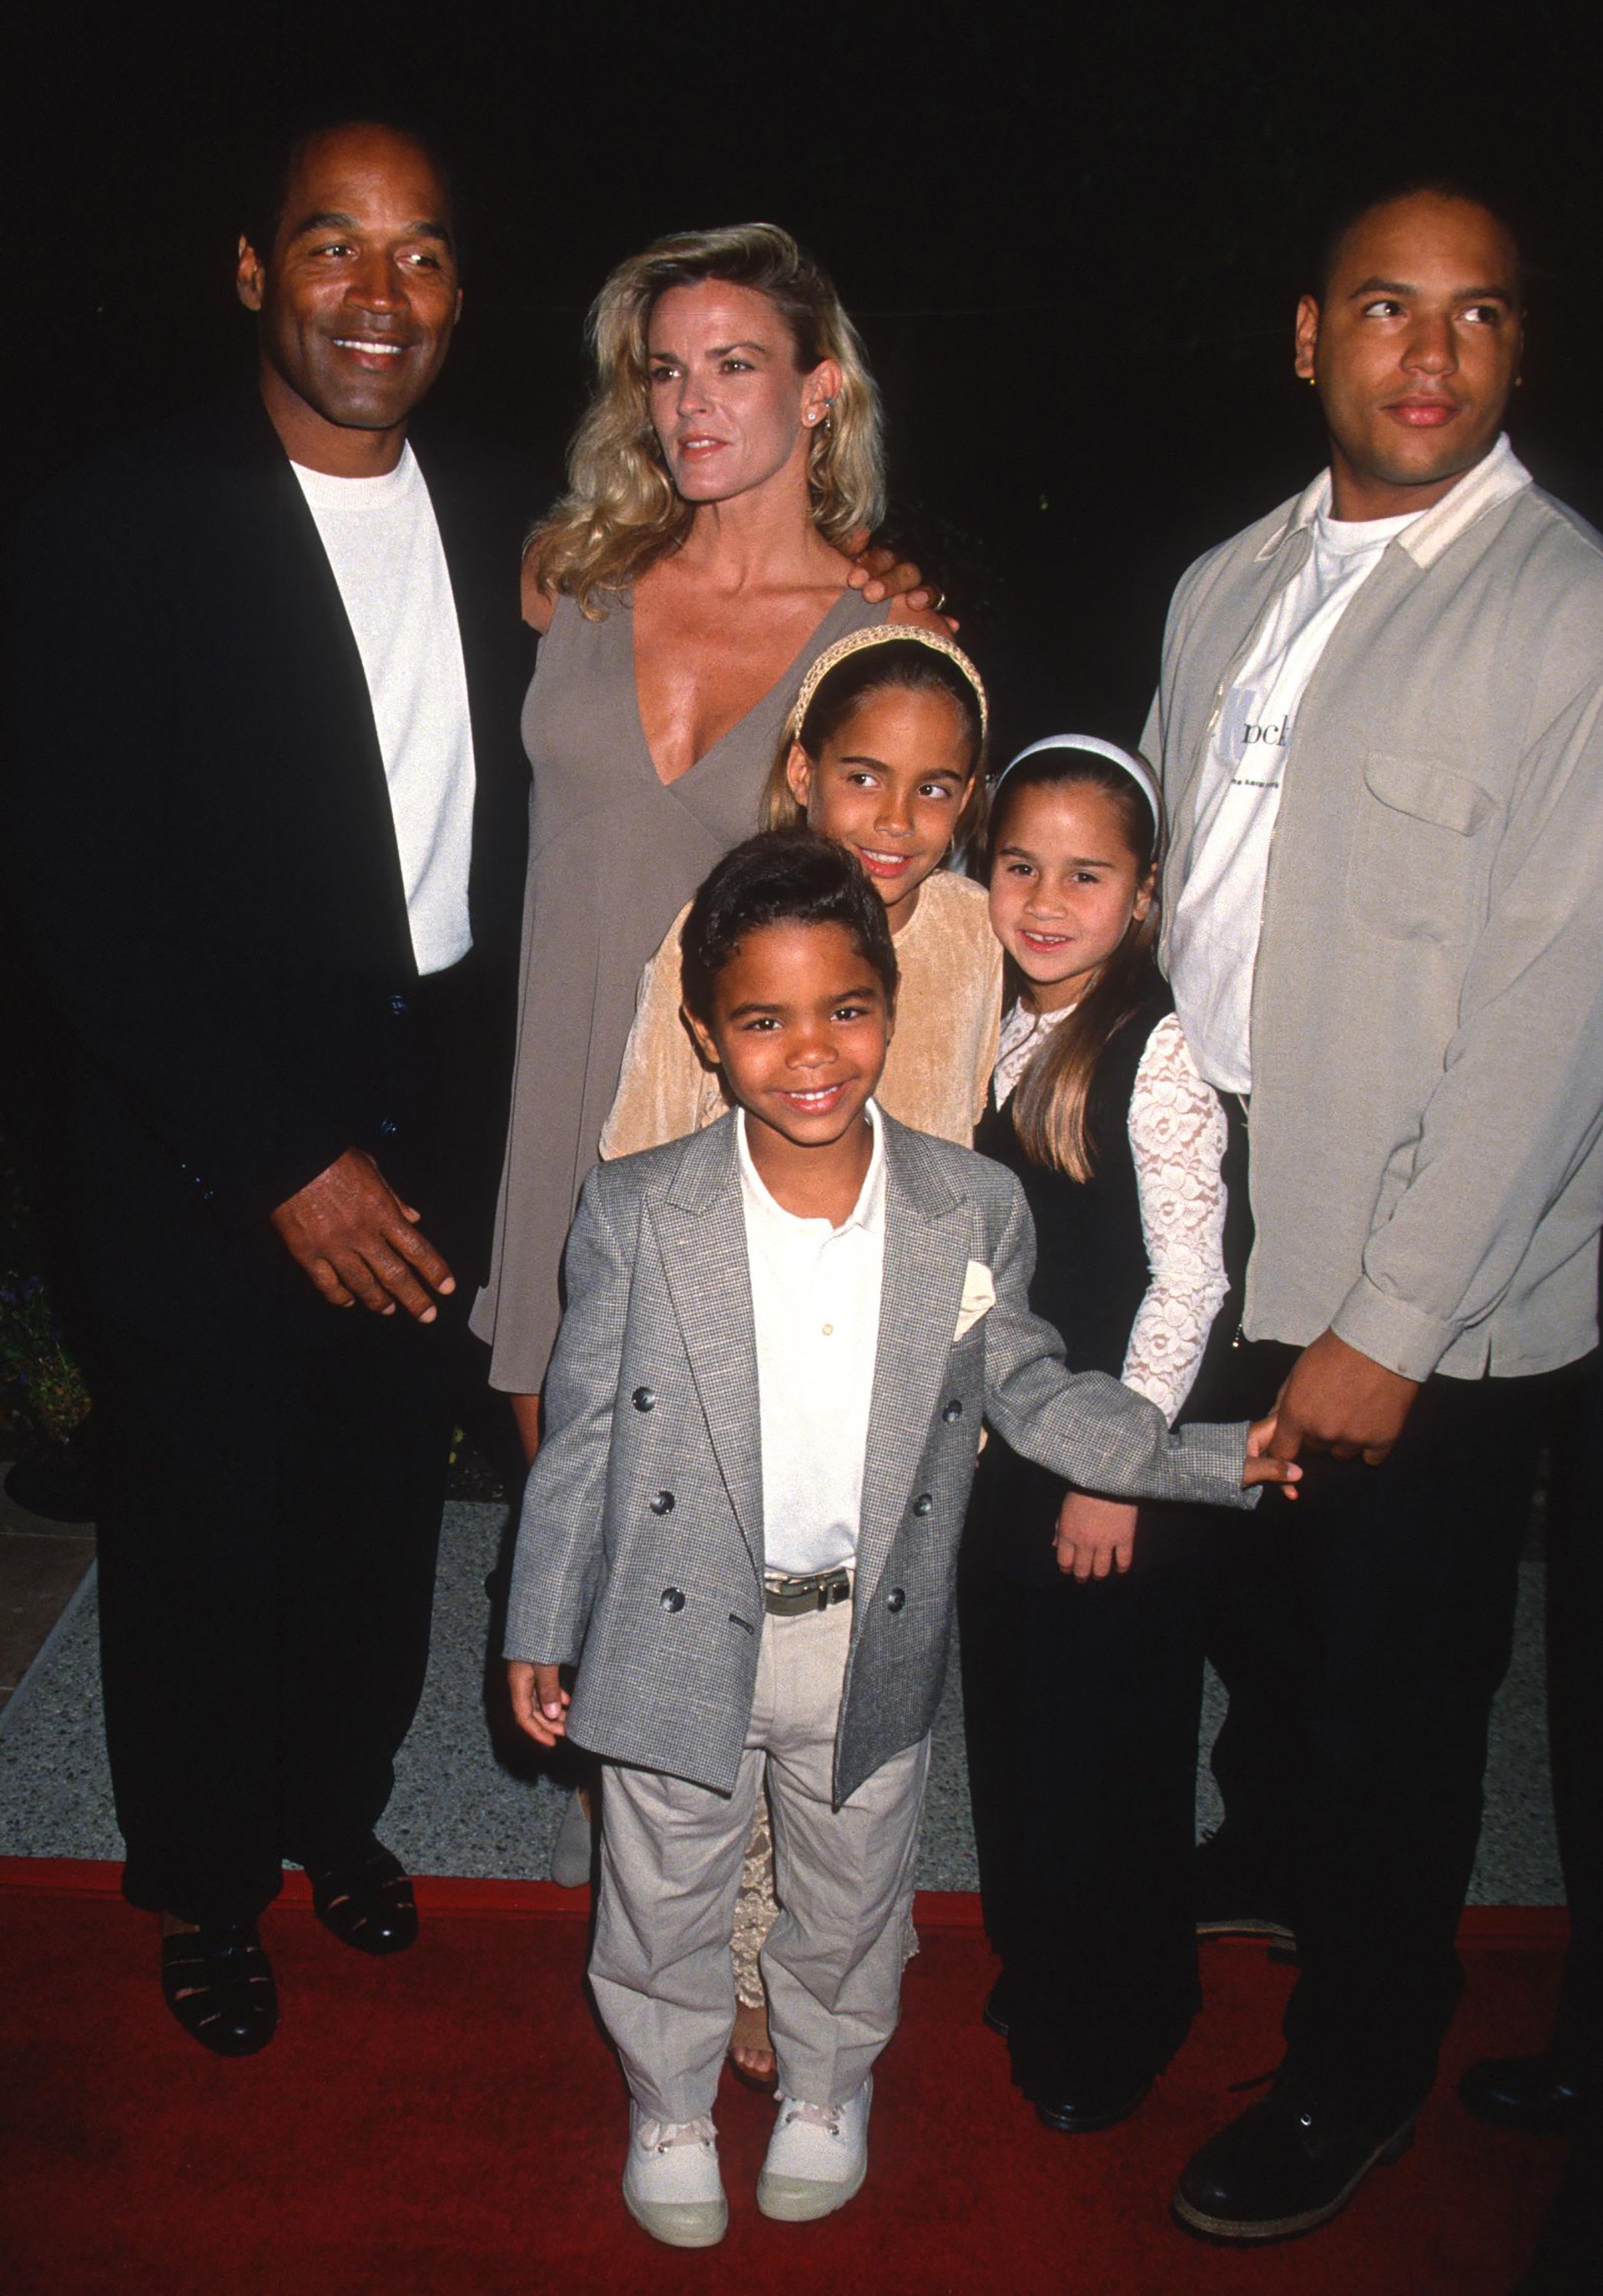 O.J. Simpson and his wife, Nicole Brown Simpson along with their children Justin, Sydney, and Jason, attend a screening of "Naked Gun 33 1/" on March 16, 1994, in Hollywood, California. | Source: Getty Images